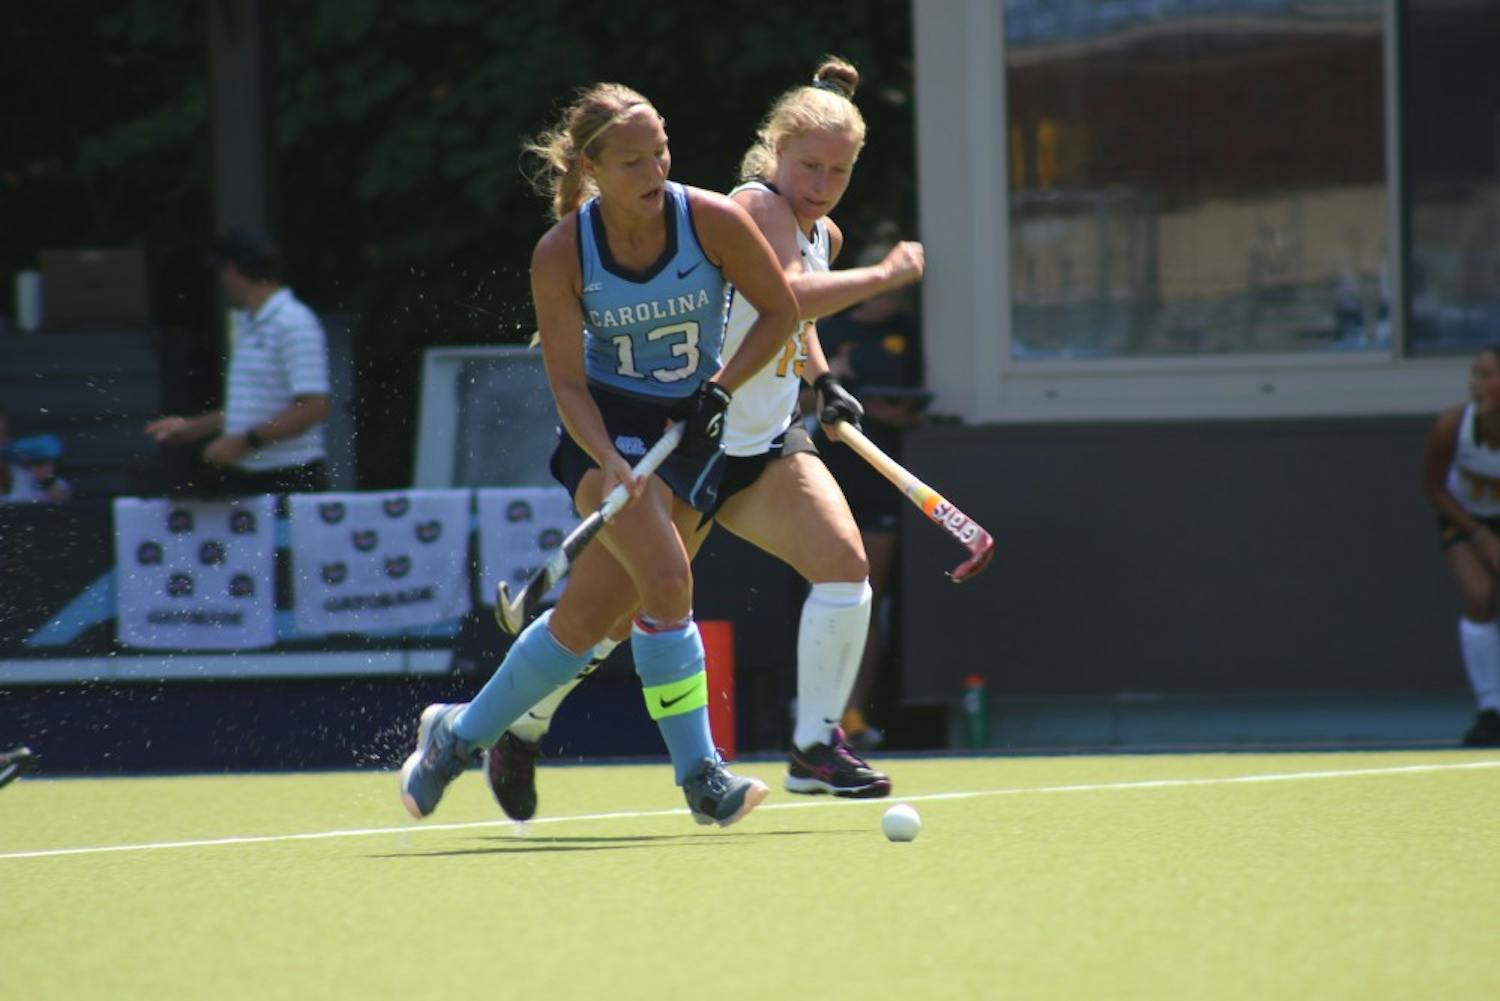 Senior defender Ashley Hoffman (13) boxes out a defender during UNC's 2-1 win over Iowa at Carolina Field Hockey Stadium on Aug. 26.